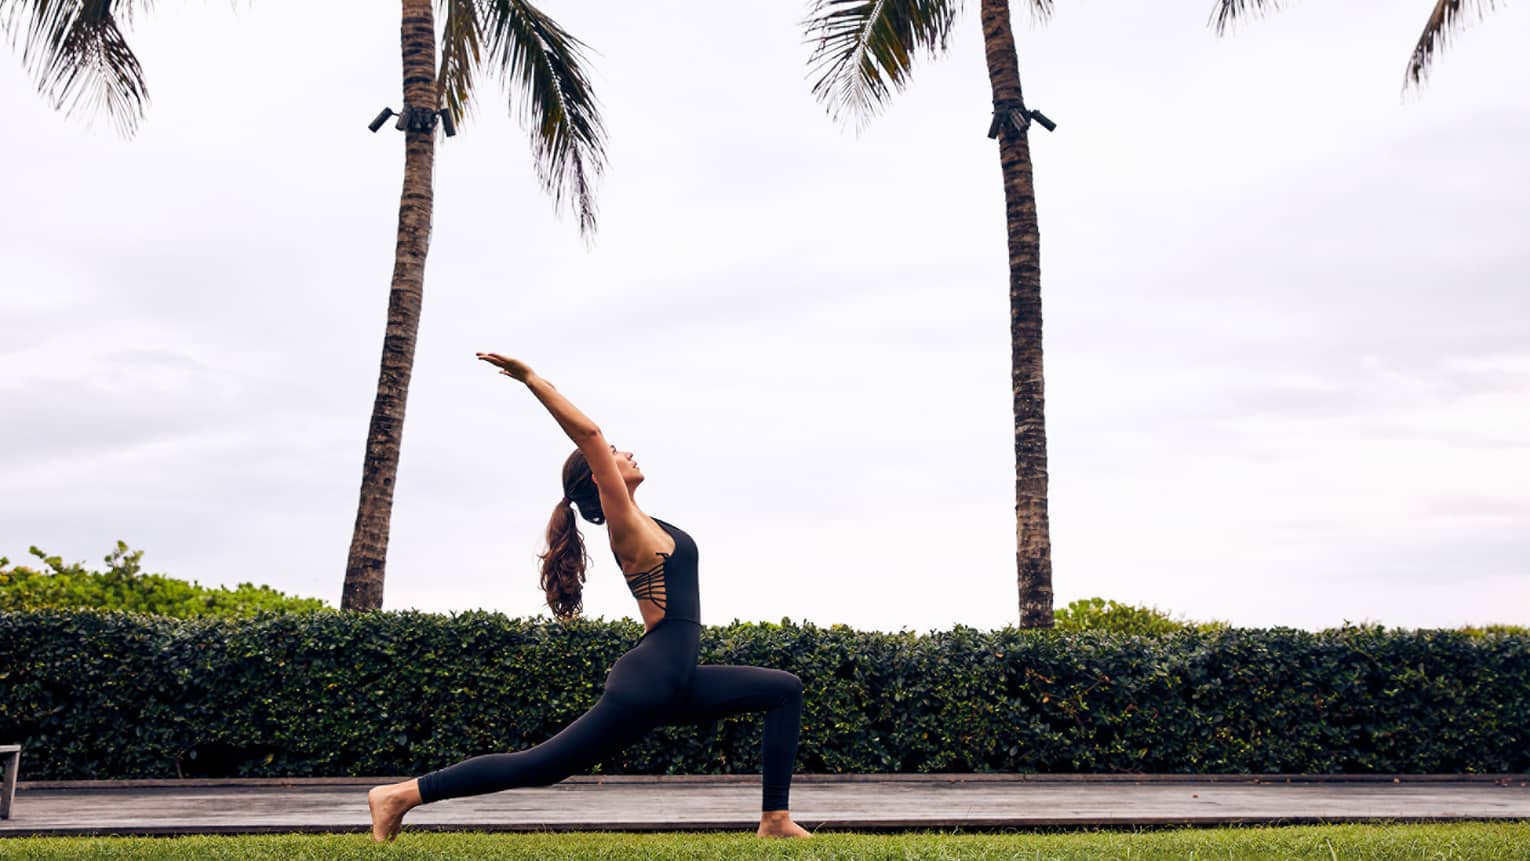 A woman outside on grass next to palm trees doing yoga.